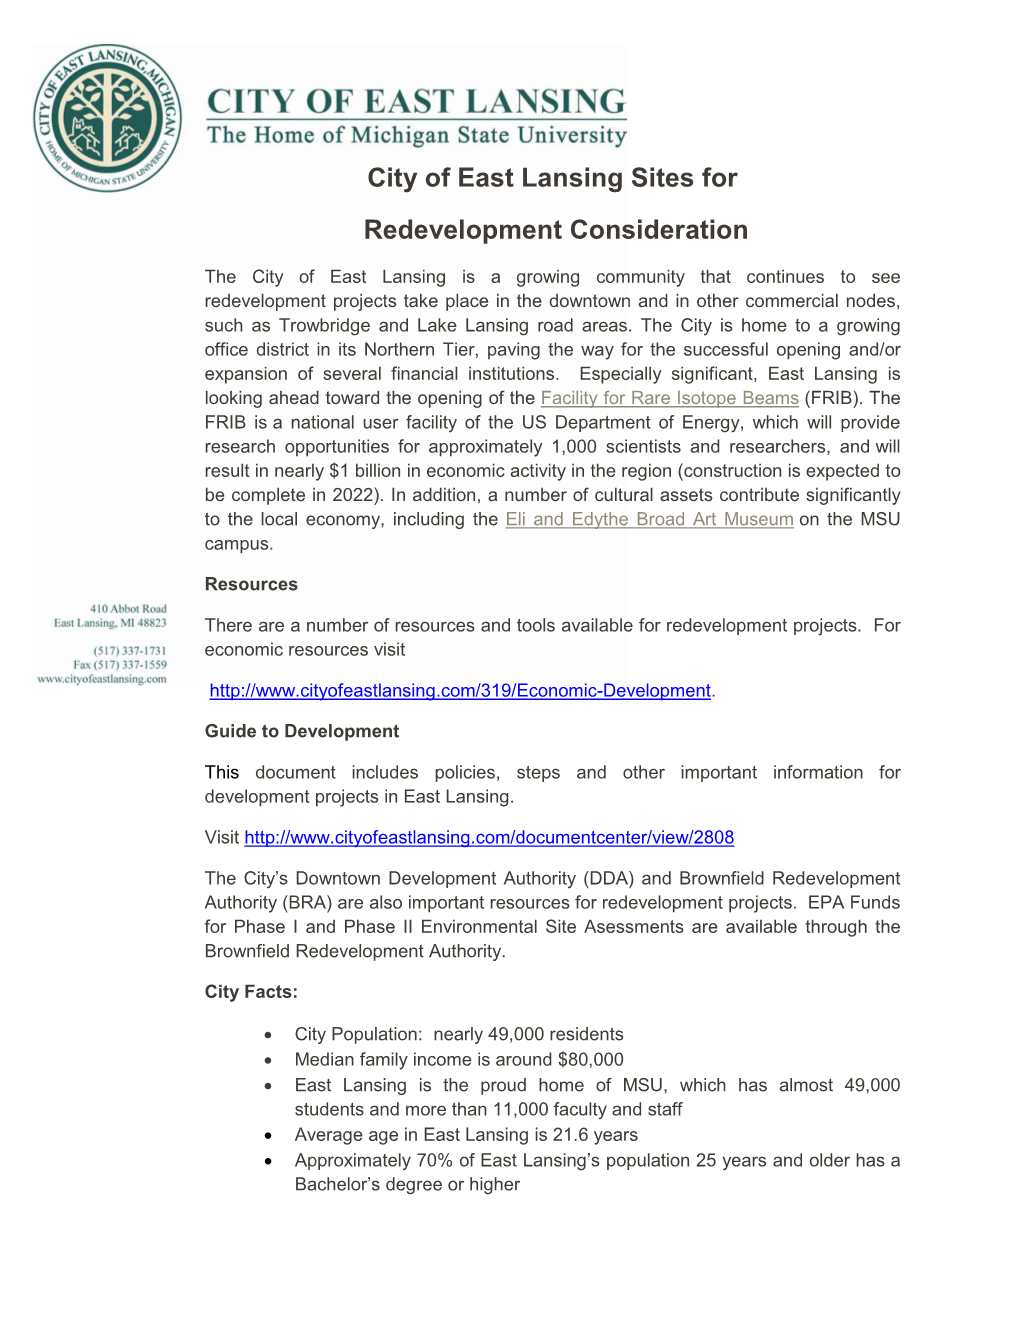 City of East Lansing Sites for Redevelopment Consideration